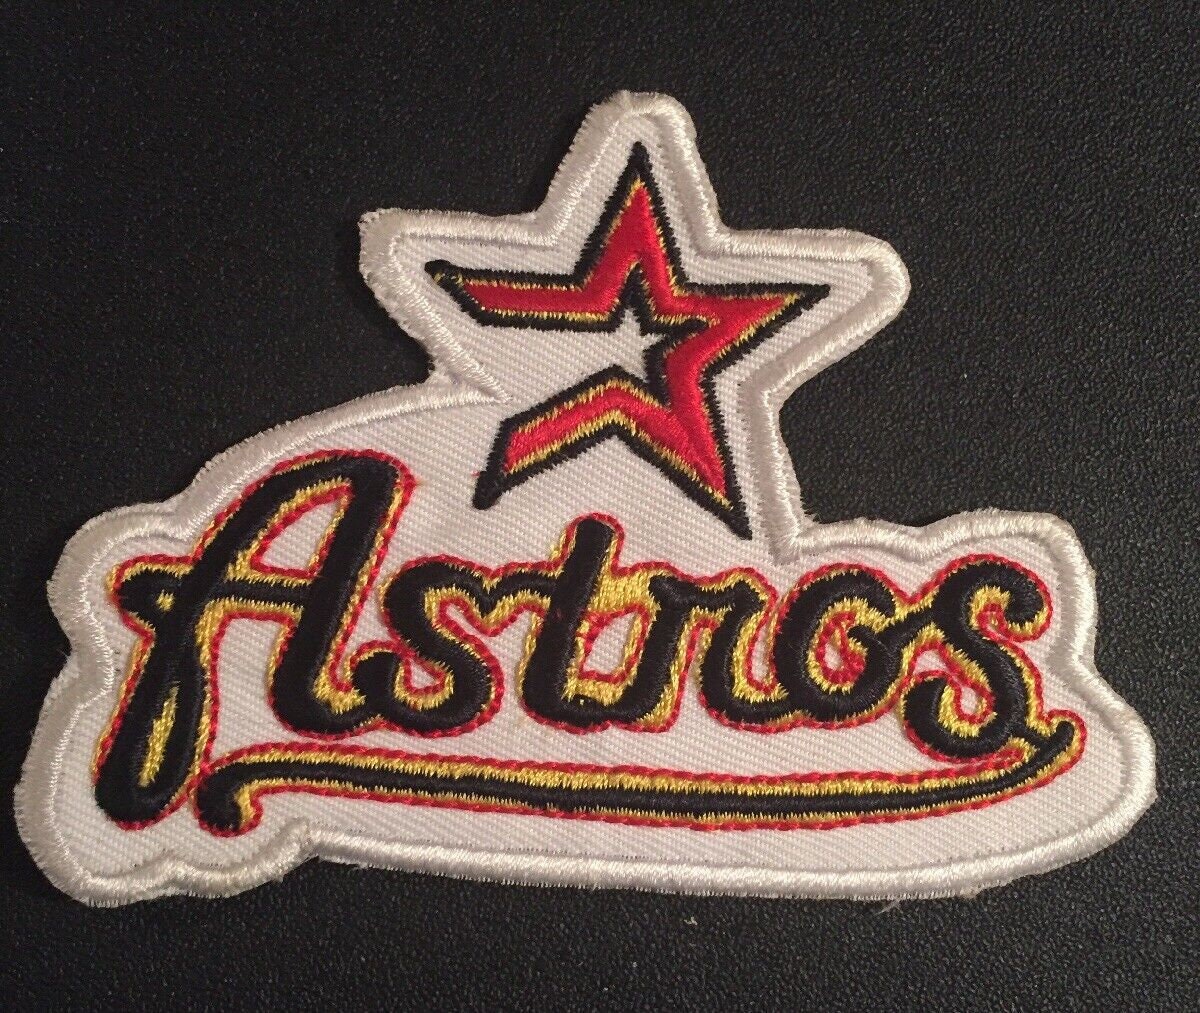 Houston Astros World Series 2017 Morale Patch